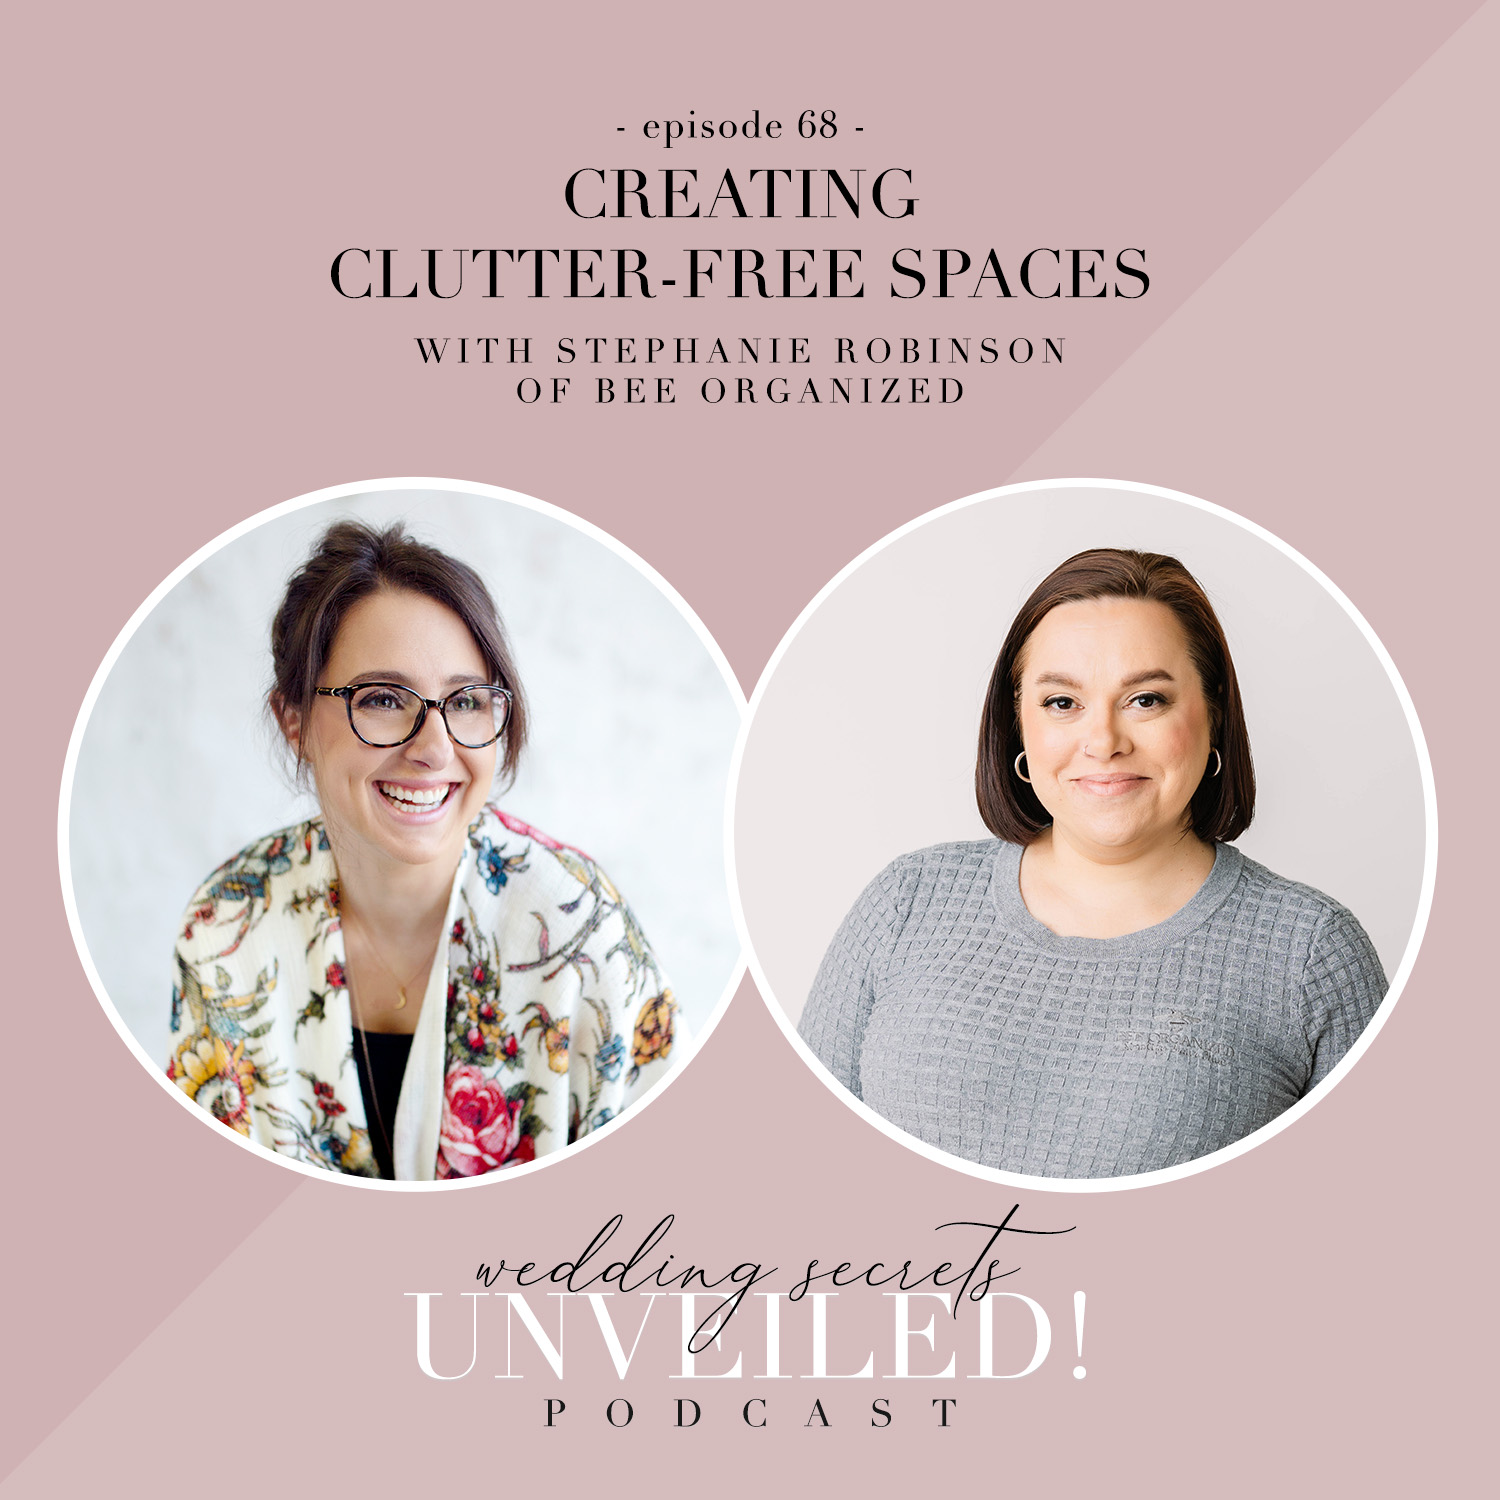 Creating Clutter-Free Spaces: an interview with Stephanie Robinson of Bee Organized about combining households on Wedding Secrets Unveiled!